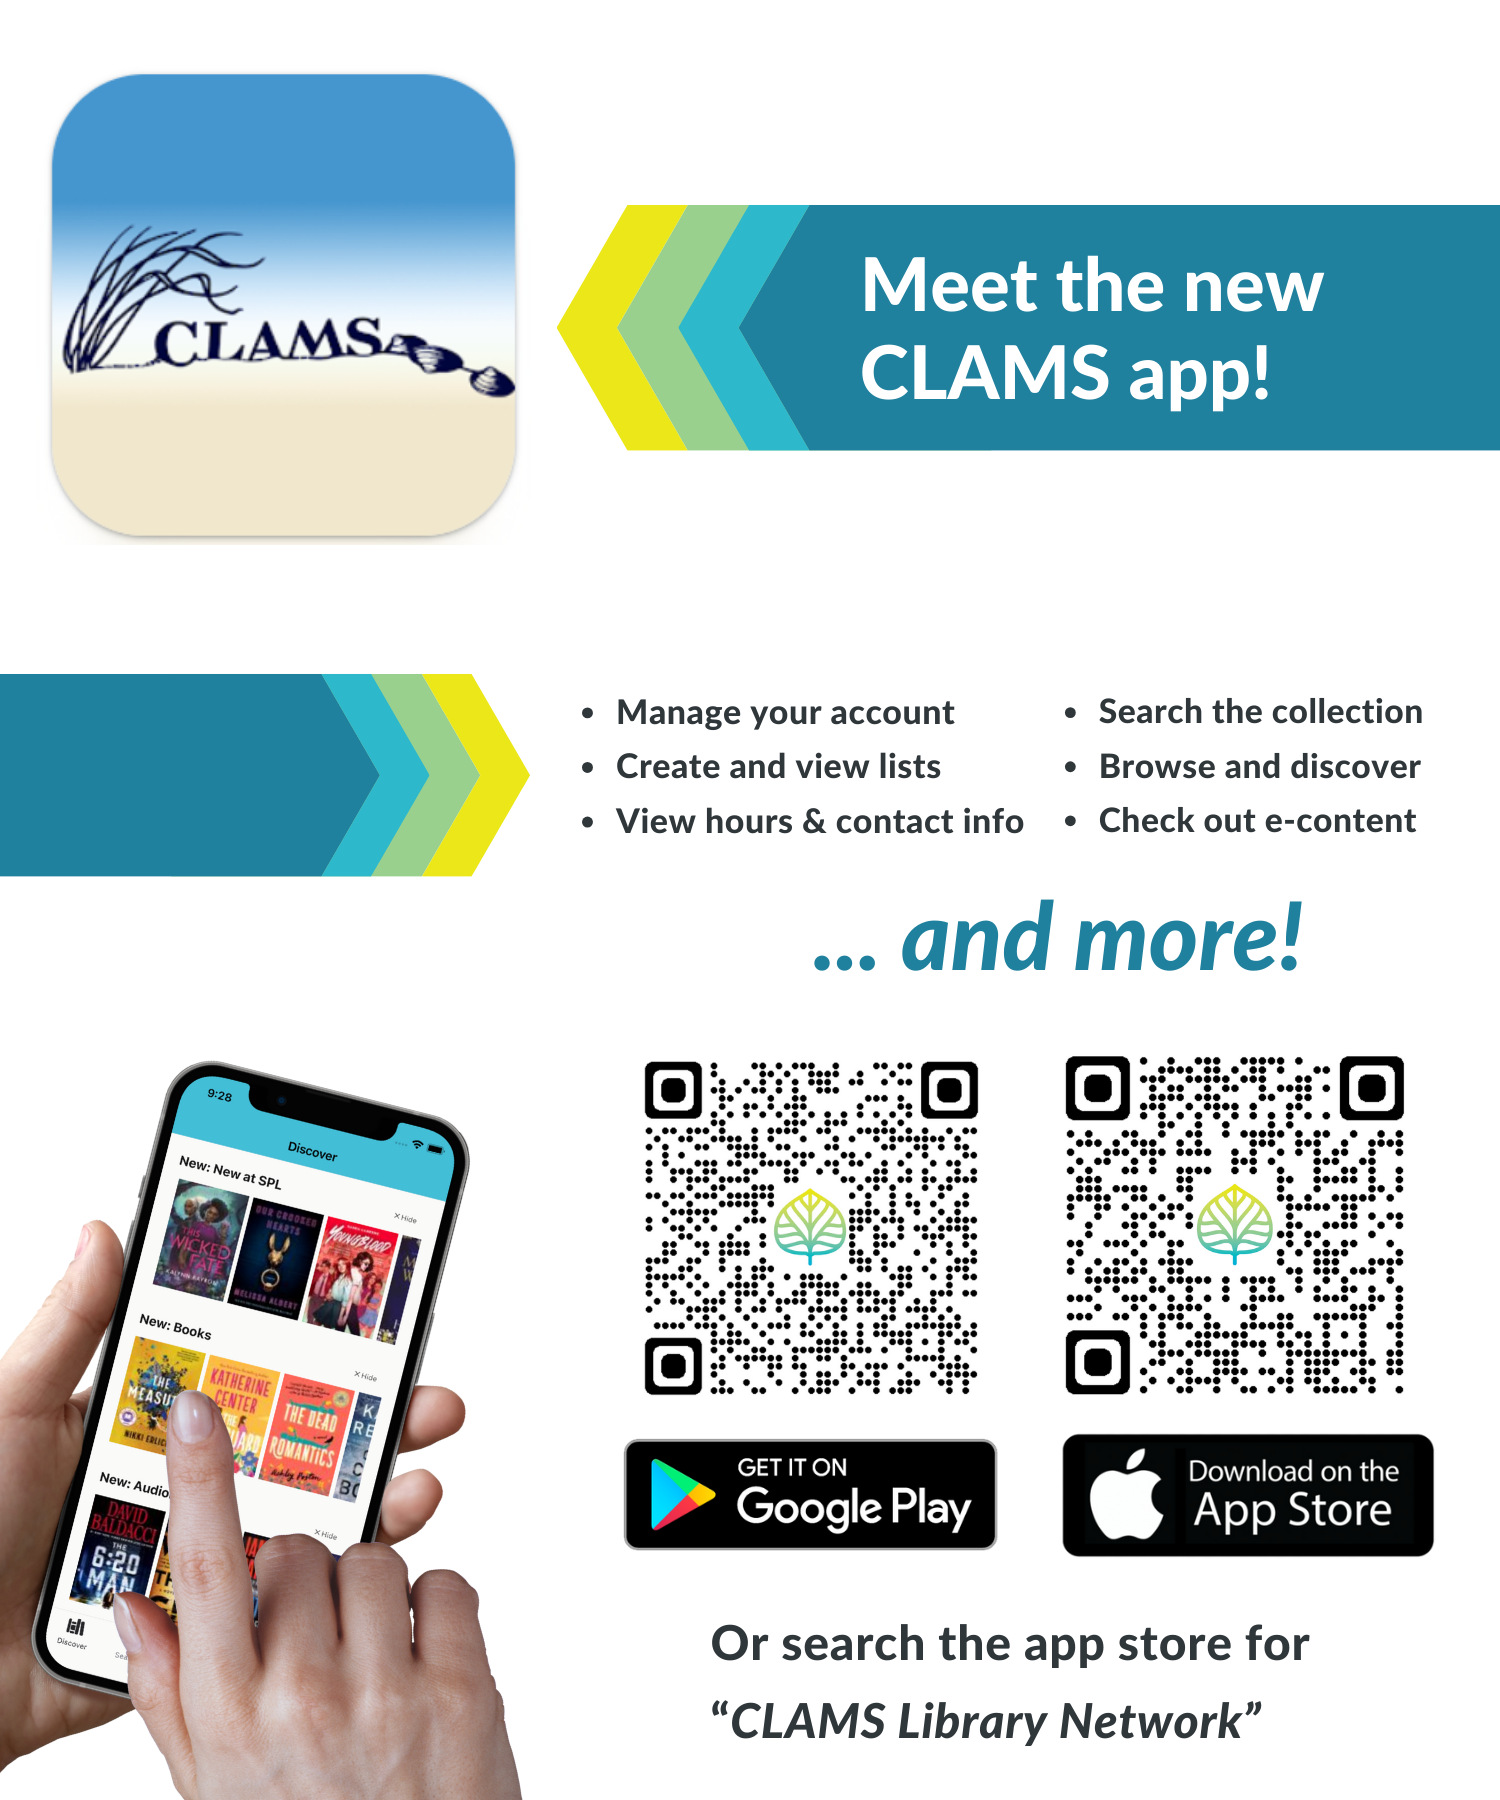 The image announces CLAMS Library Network's new mobile app, with QR codes to access the app in app stores.